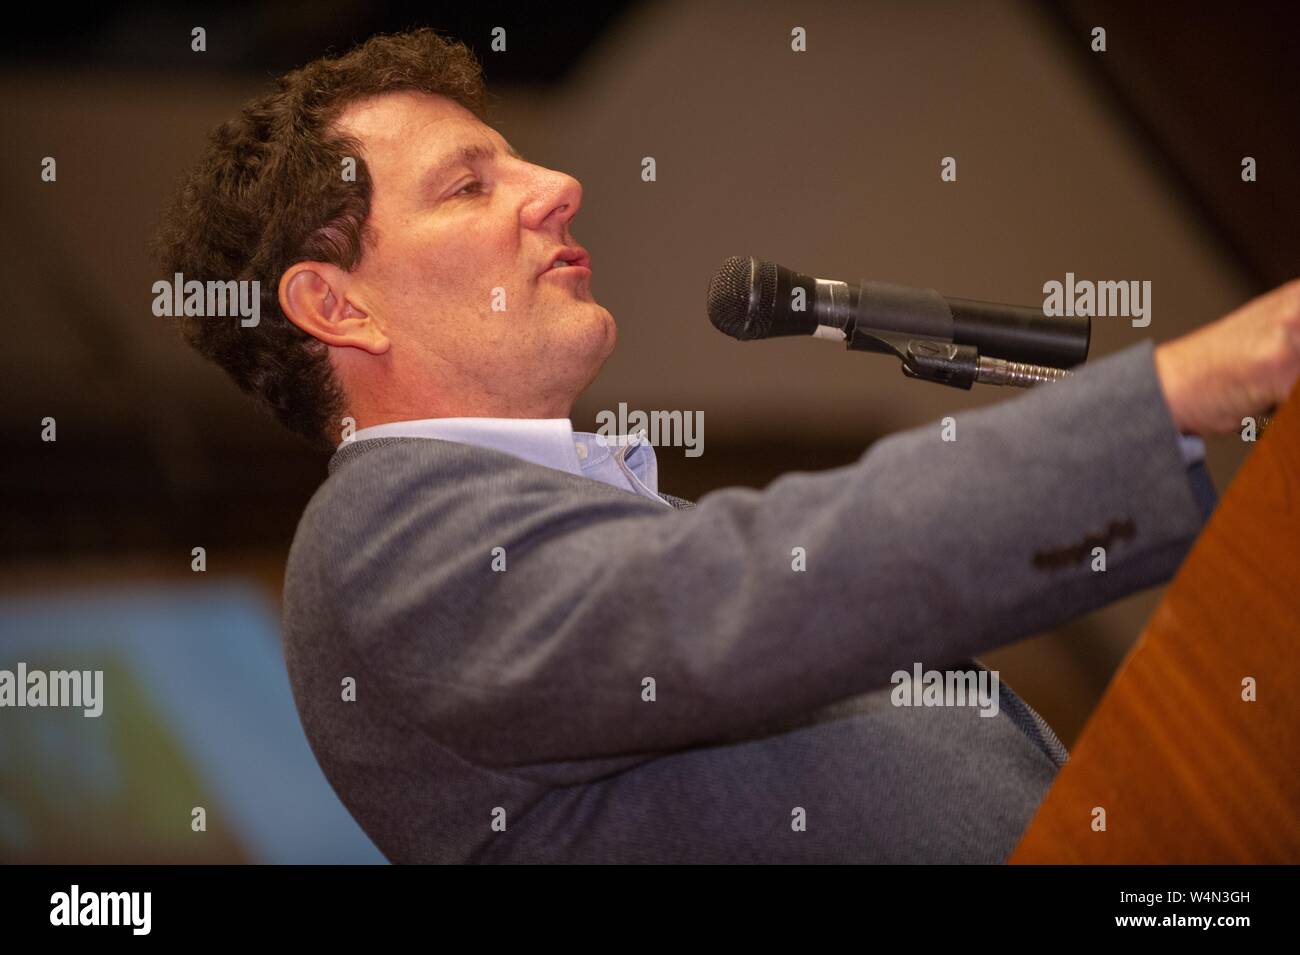 Journalist Nicholas Kristof speaks during a Foreign Affairs symposium at the Johns Hopkins University in Baltimore, Maryland, February 2, 2010. From the Homewood Photography collection. () Stock Photo